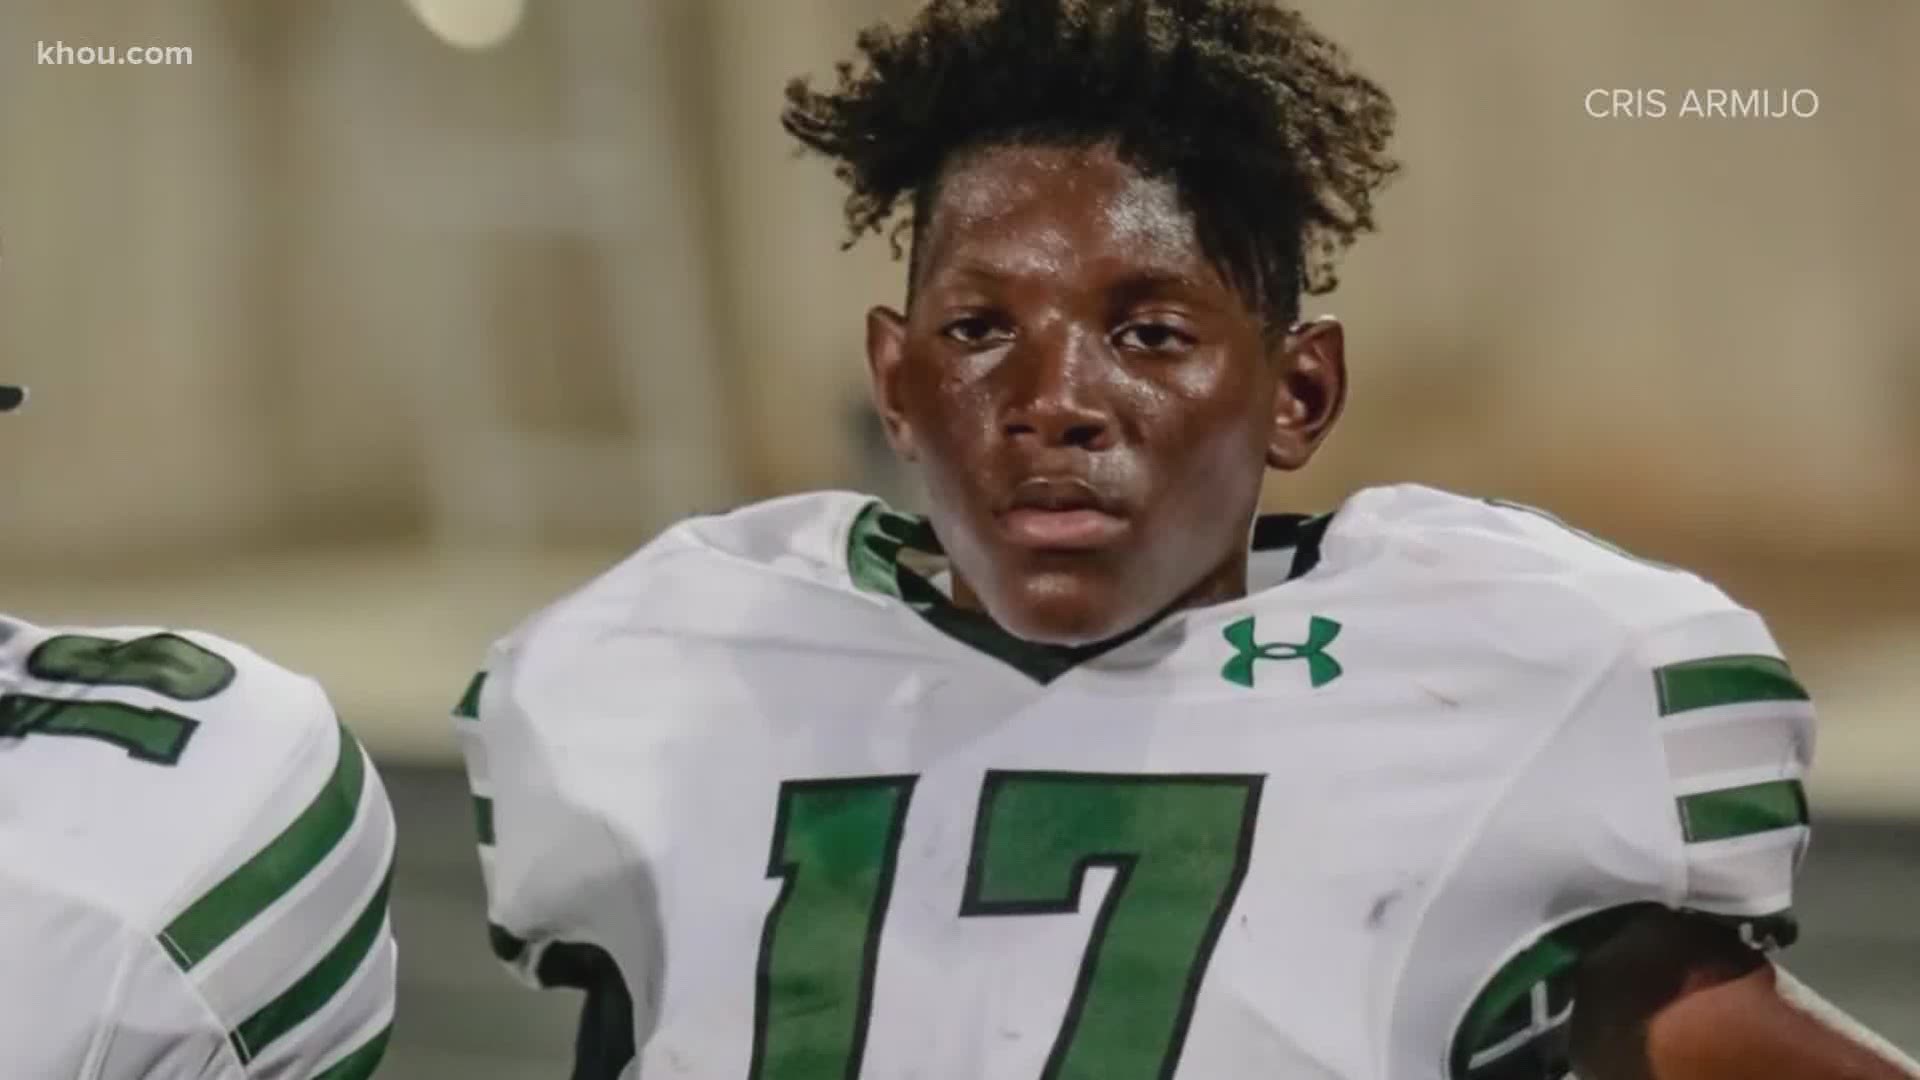 Students and staff at Hightower High School are mourning a star student-athlete who was known for his character off the field or track as much as his athleticism.